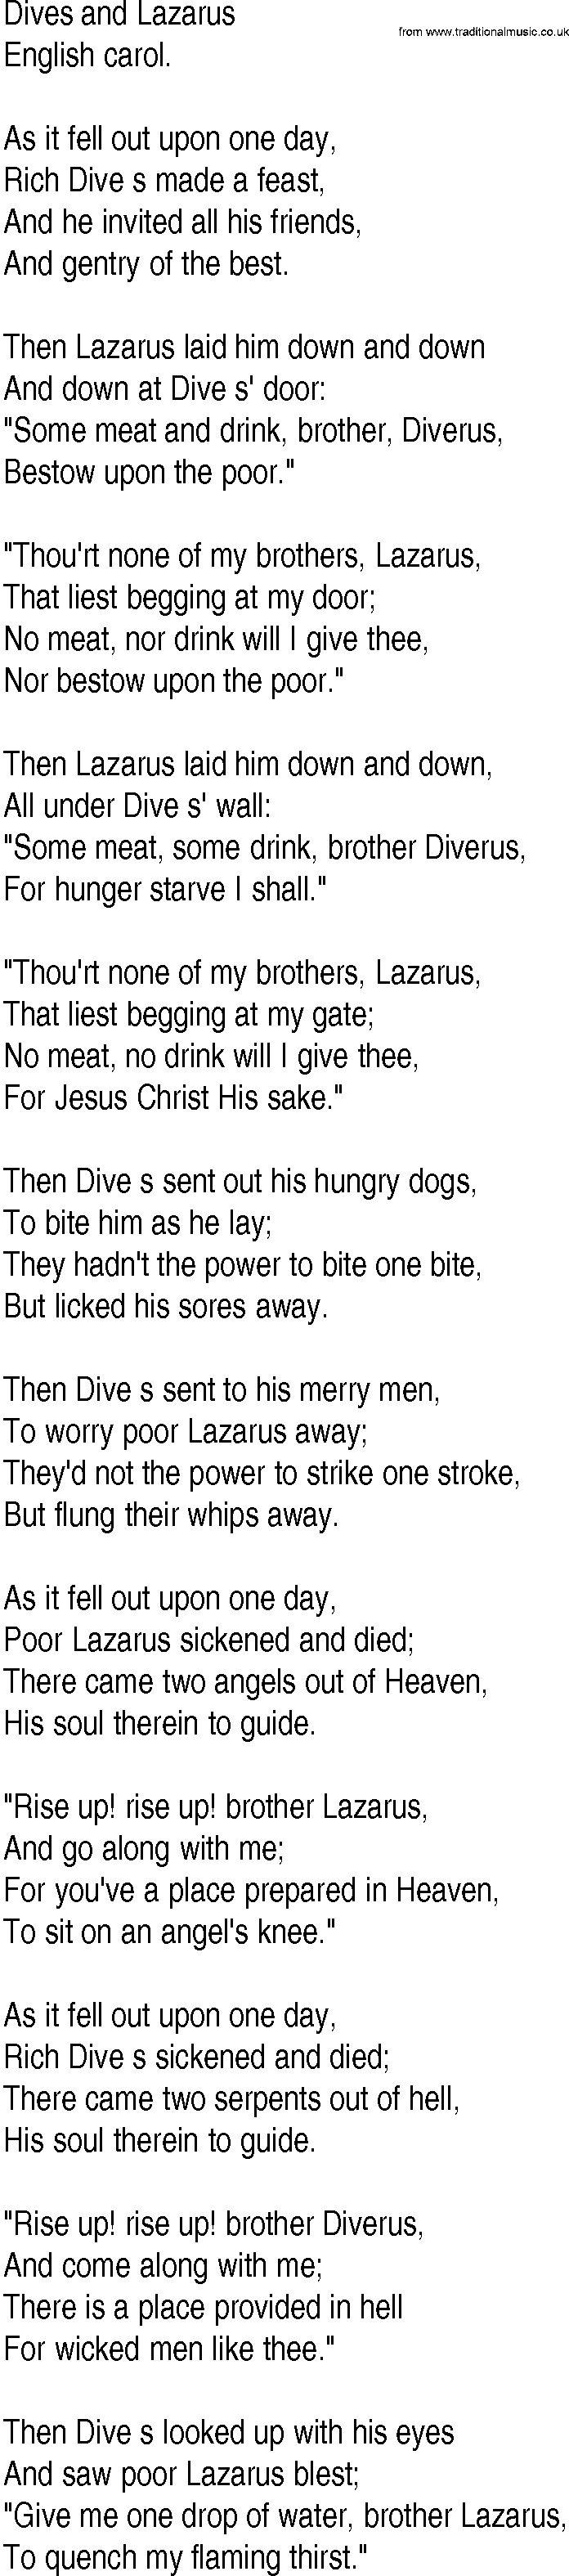 Hymn and Gospel Song: Dives and Lazarus by English carol lyrics